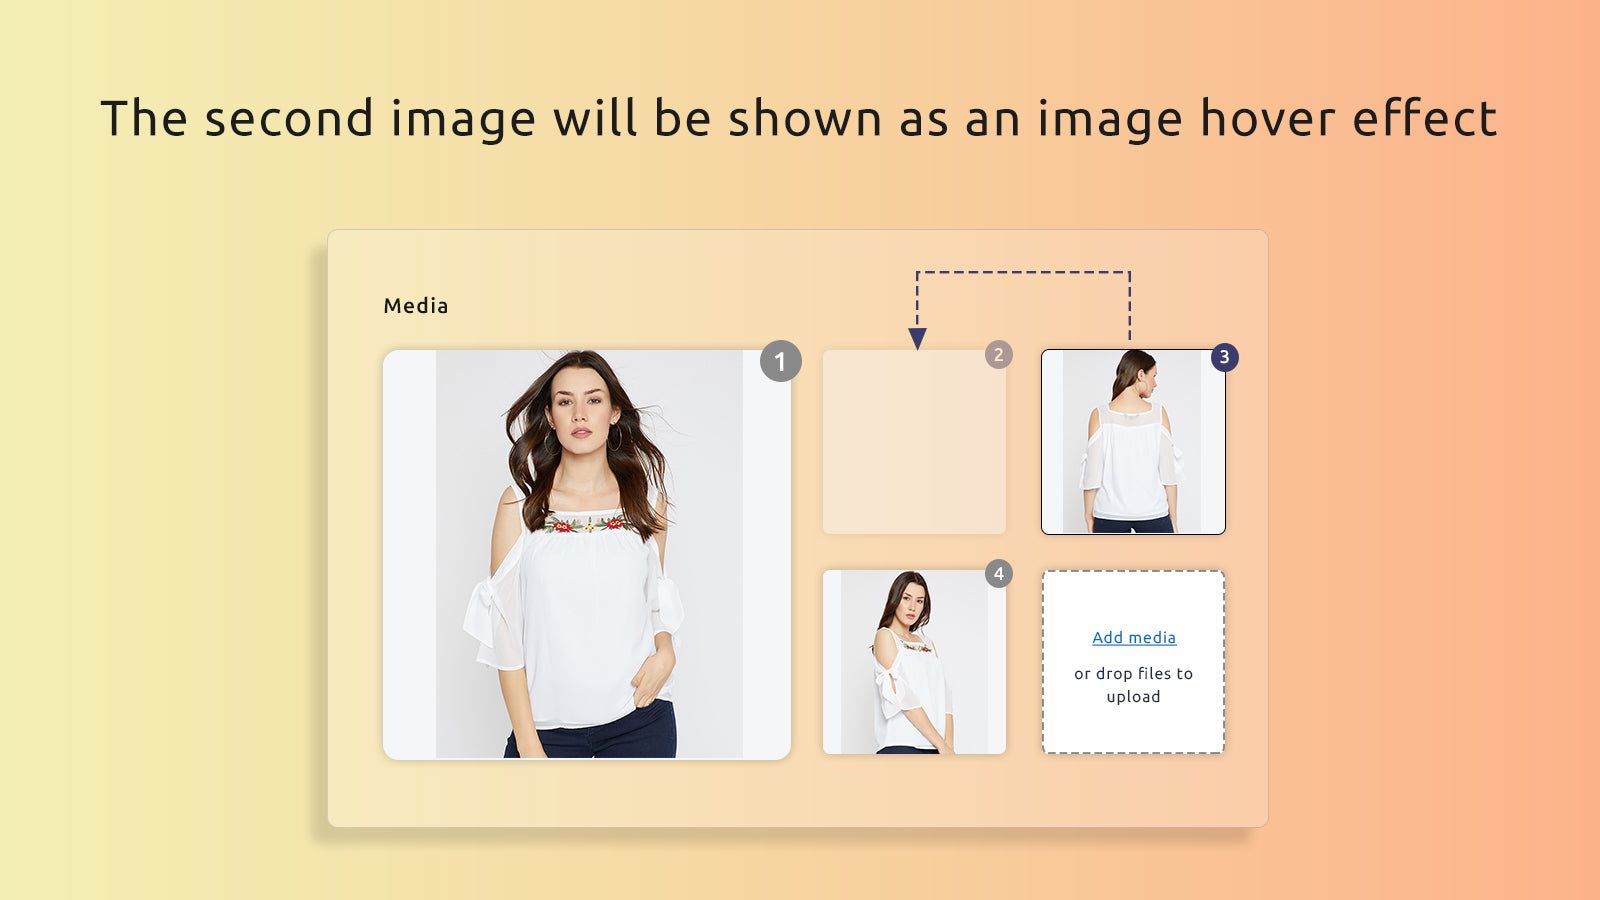 set the second image for back-image effect